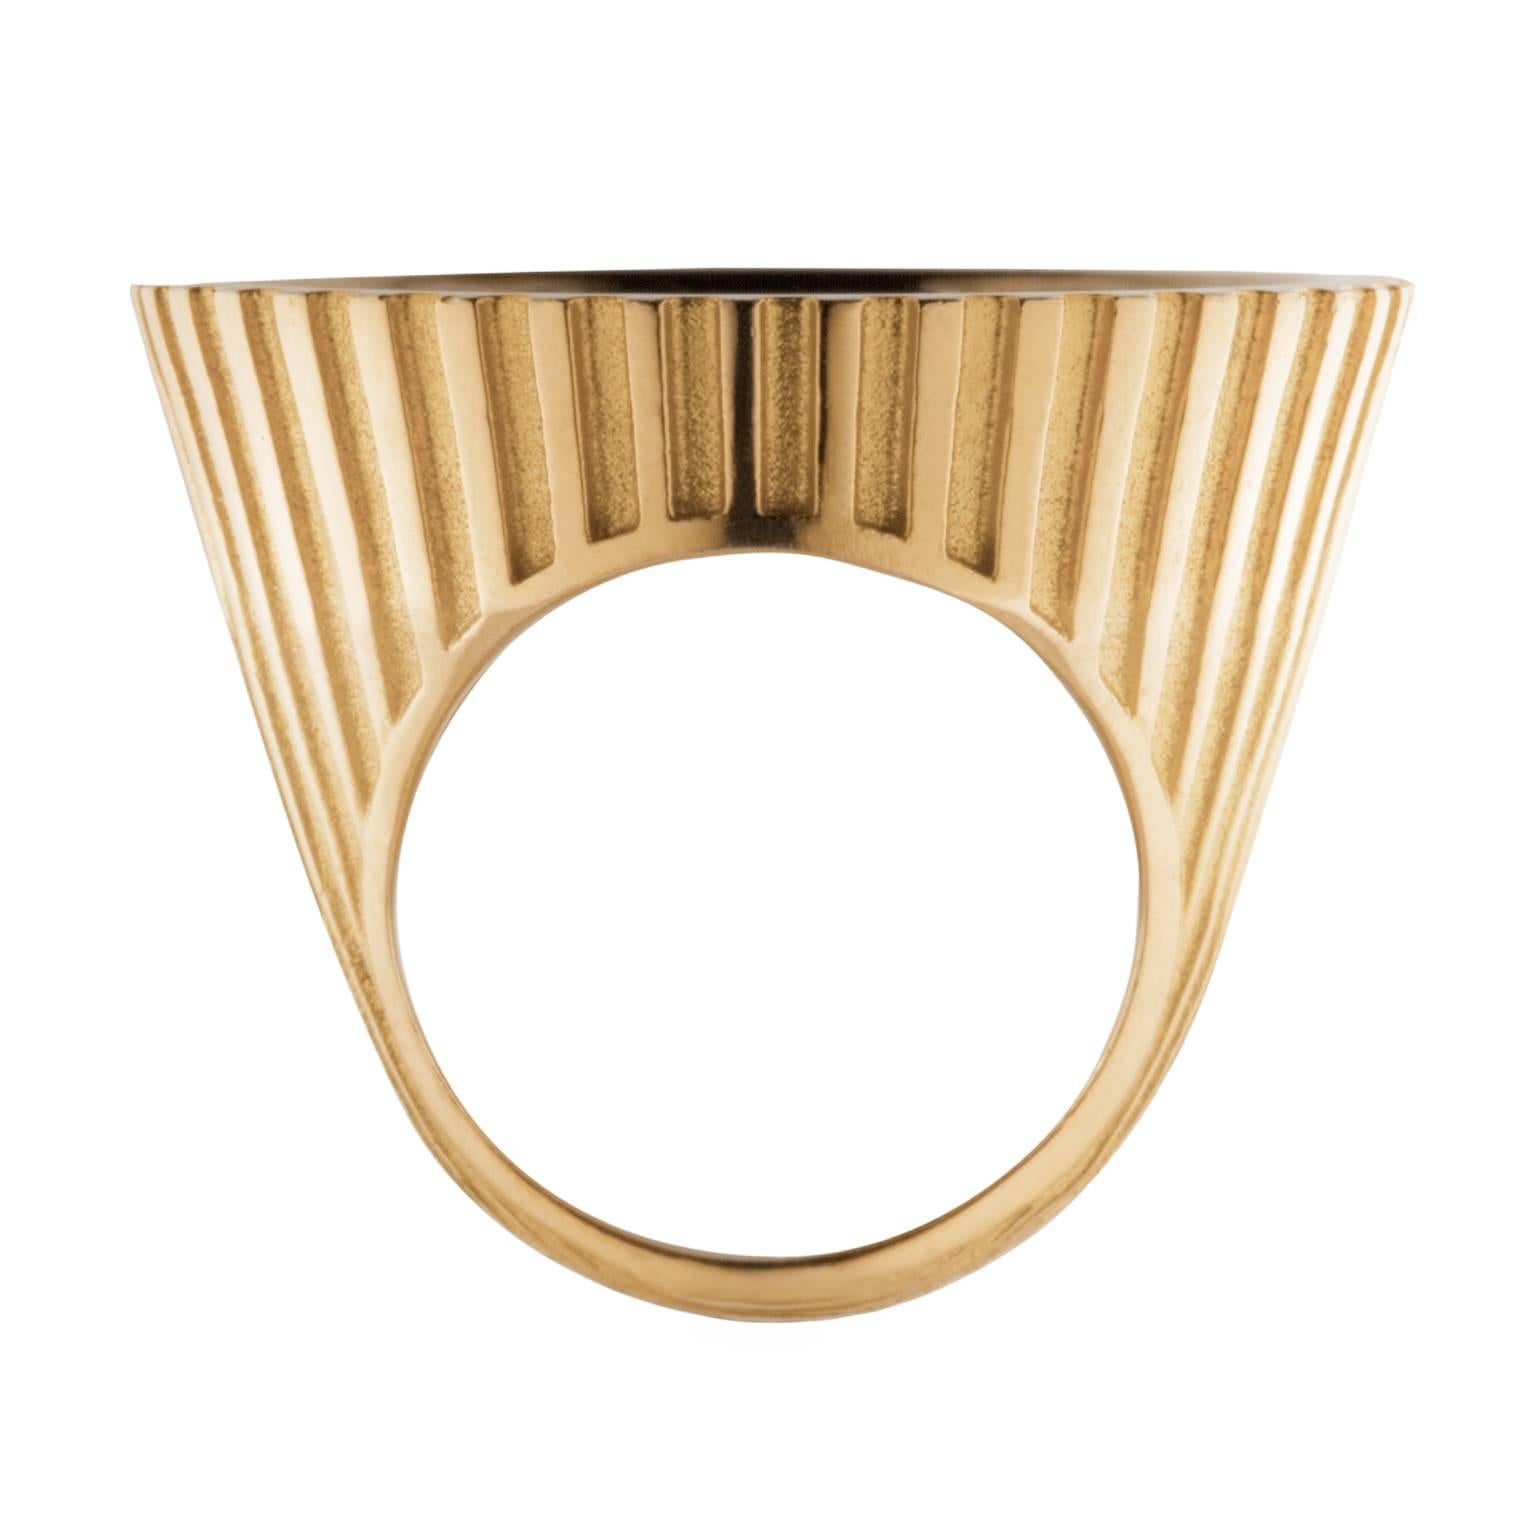 This ring is the hero of the Hannah Martin London collection entitled 'Vincent', without doubt a true show stopper. 

This ring toys with a traditional jewellery concept, subverts it and leaves us with an incredibly elegant piece of jewellery with